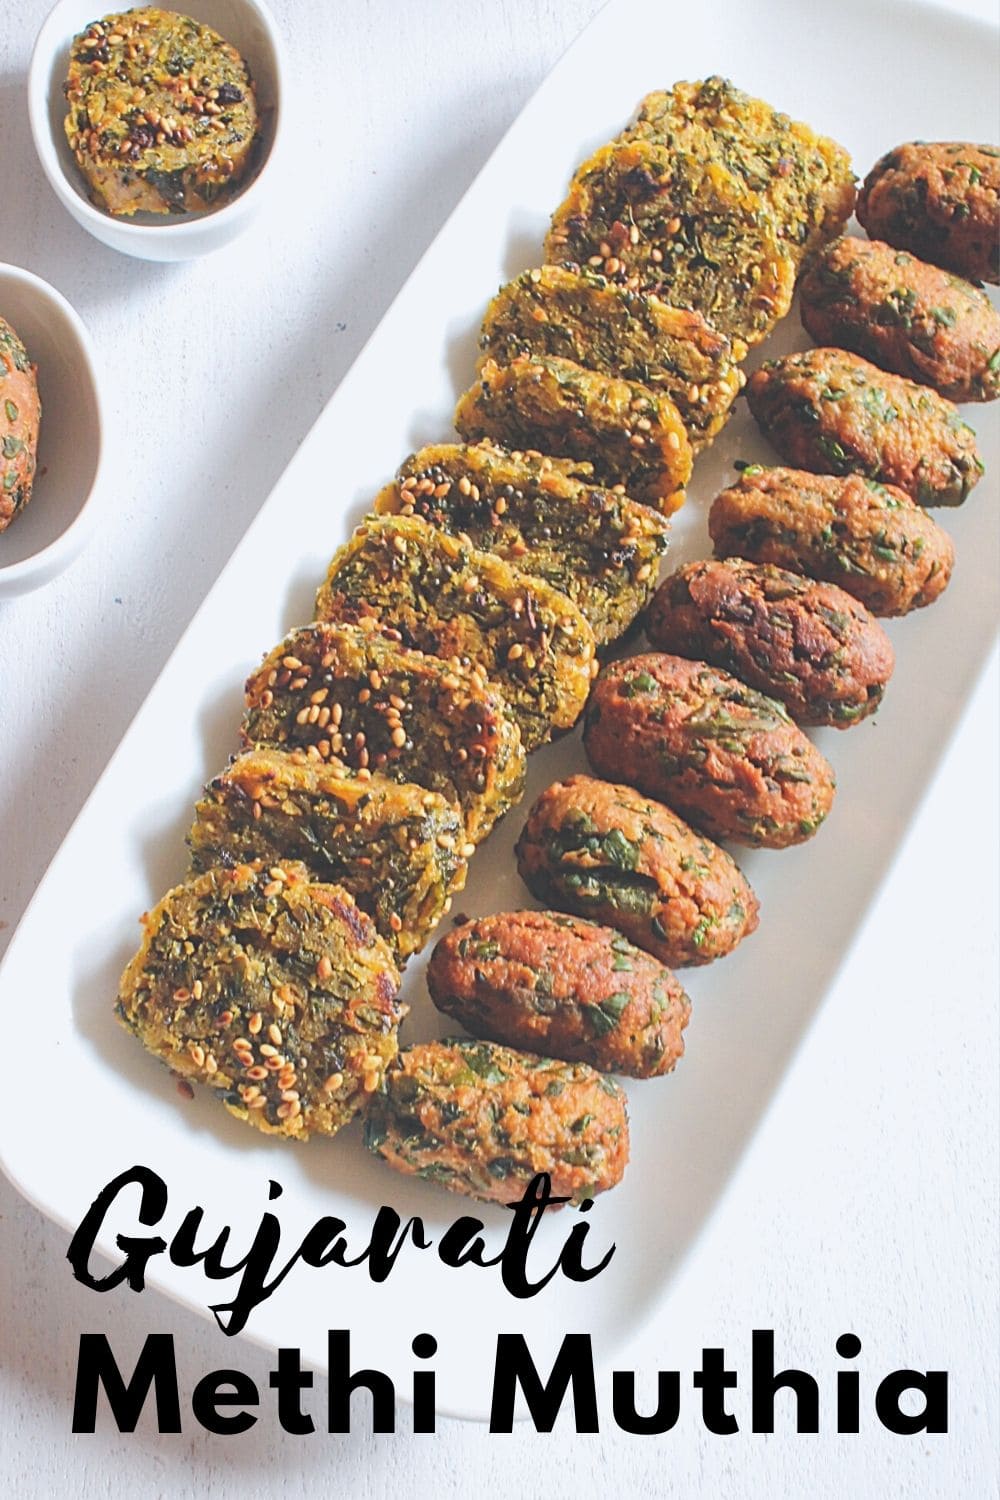 Steamed and fried methi muthia in a plate with text on the image for pinterest.